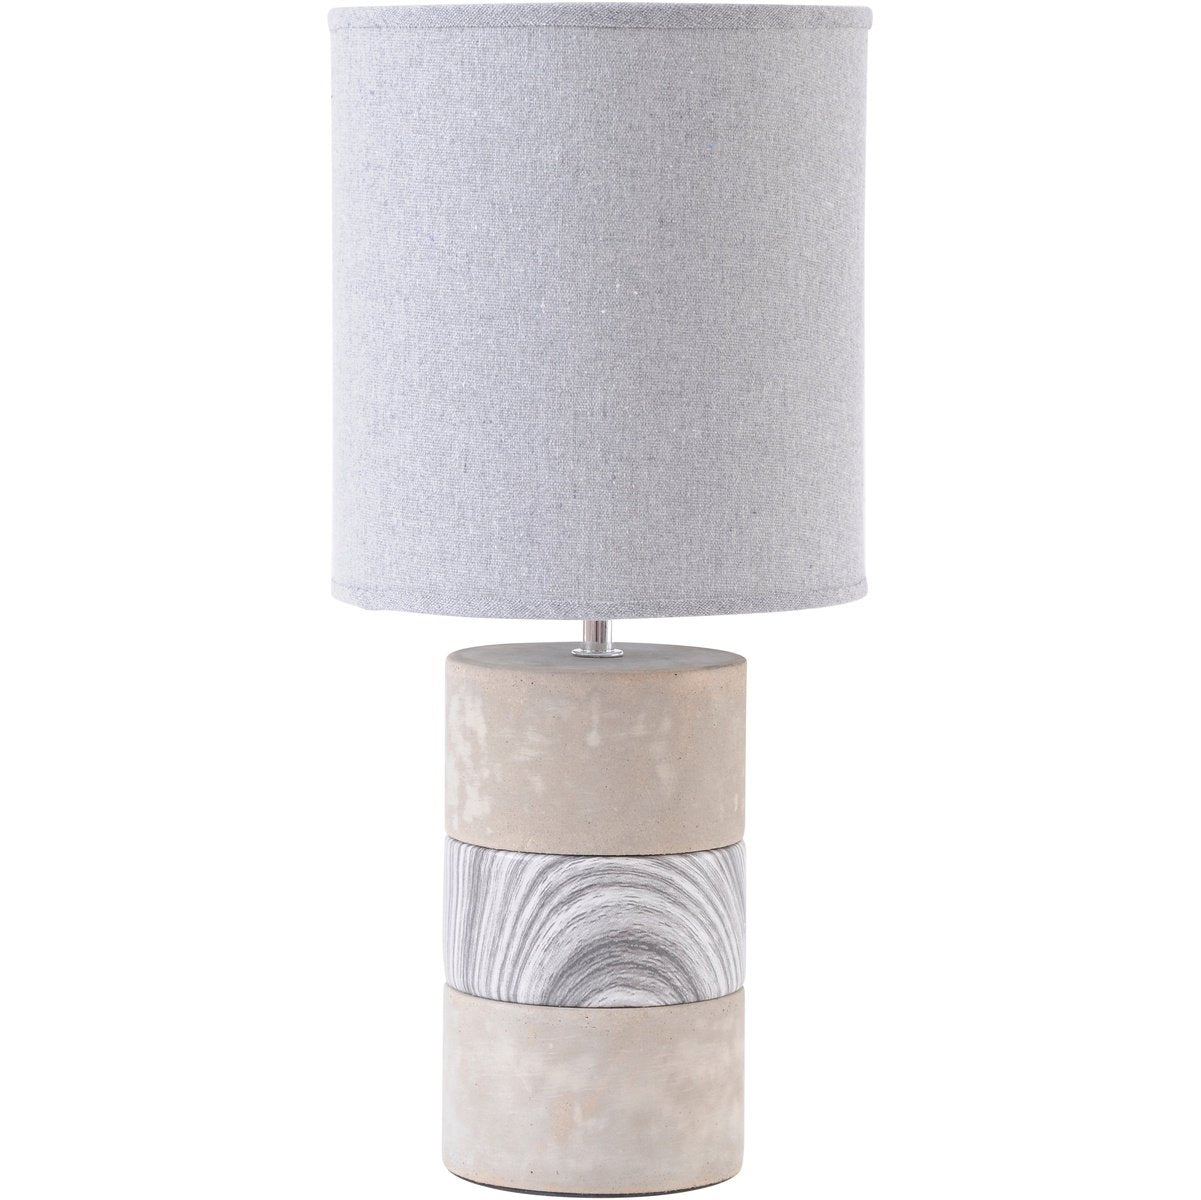 Concrete and Porcelain Table Lamp with Natural Shade  E14 40W